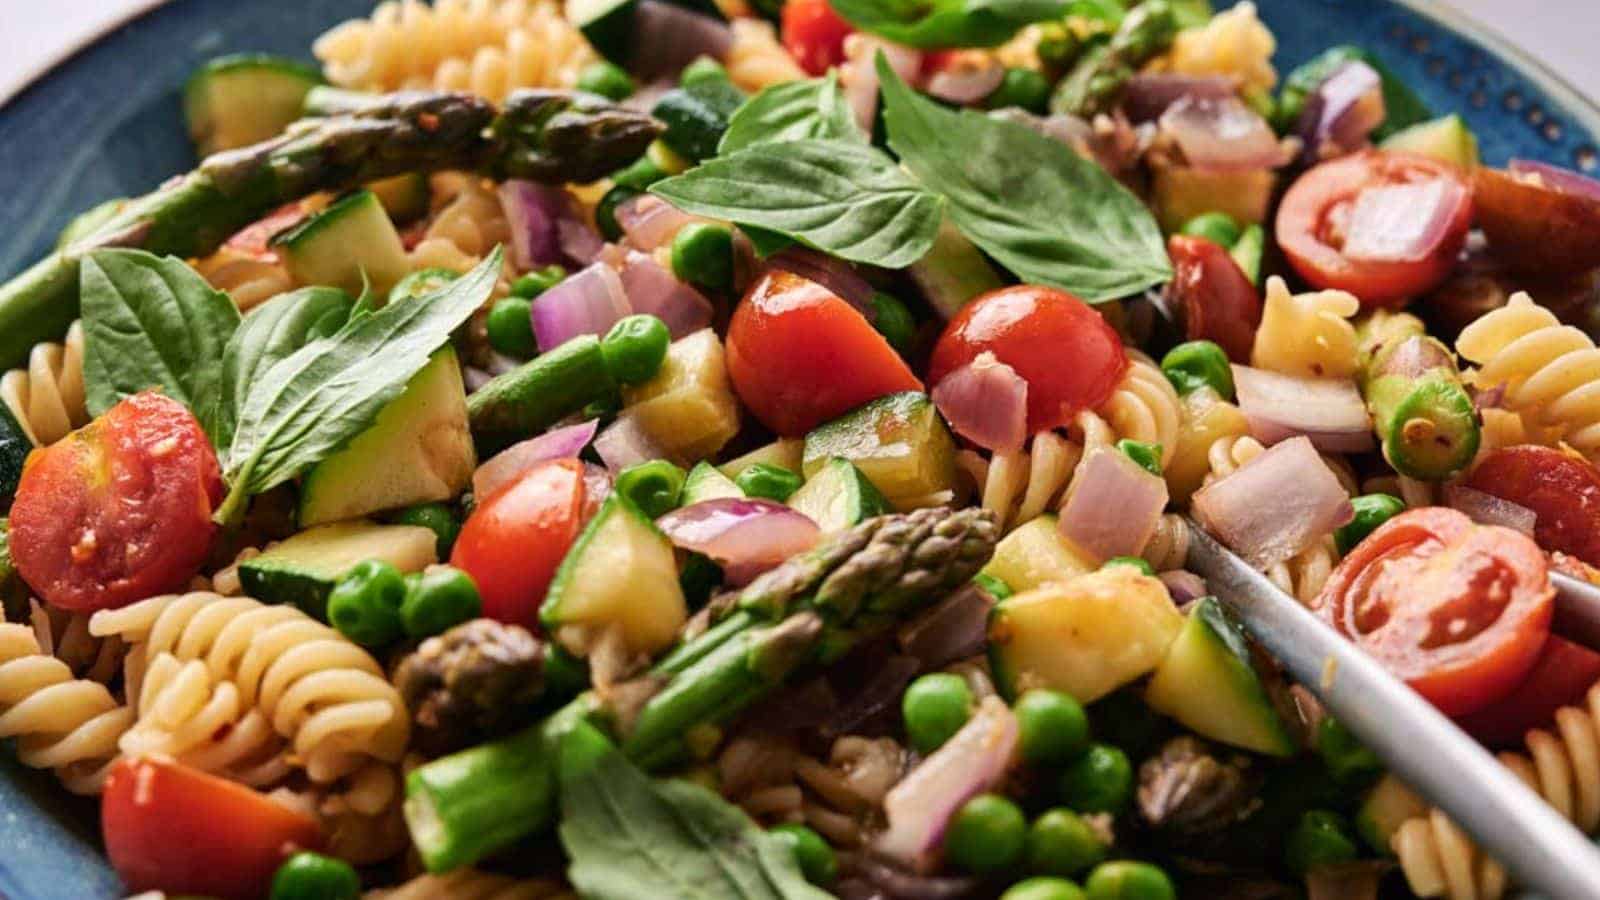 A colorful Pasta Primavera salad with cherry tomatoes, asparagus, peas, and spinach in a blue bowl.